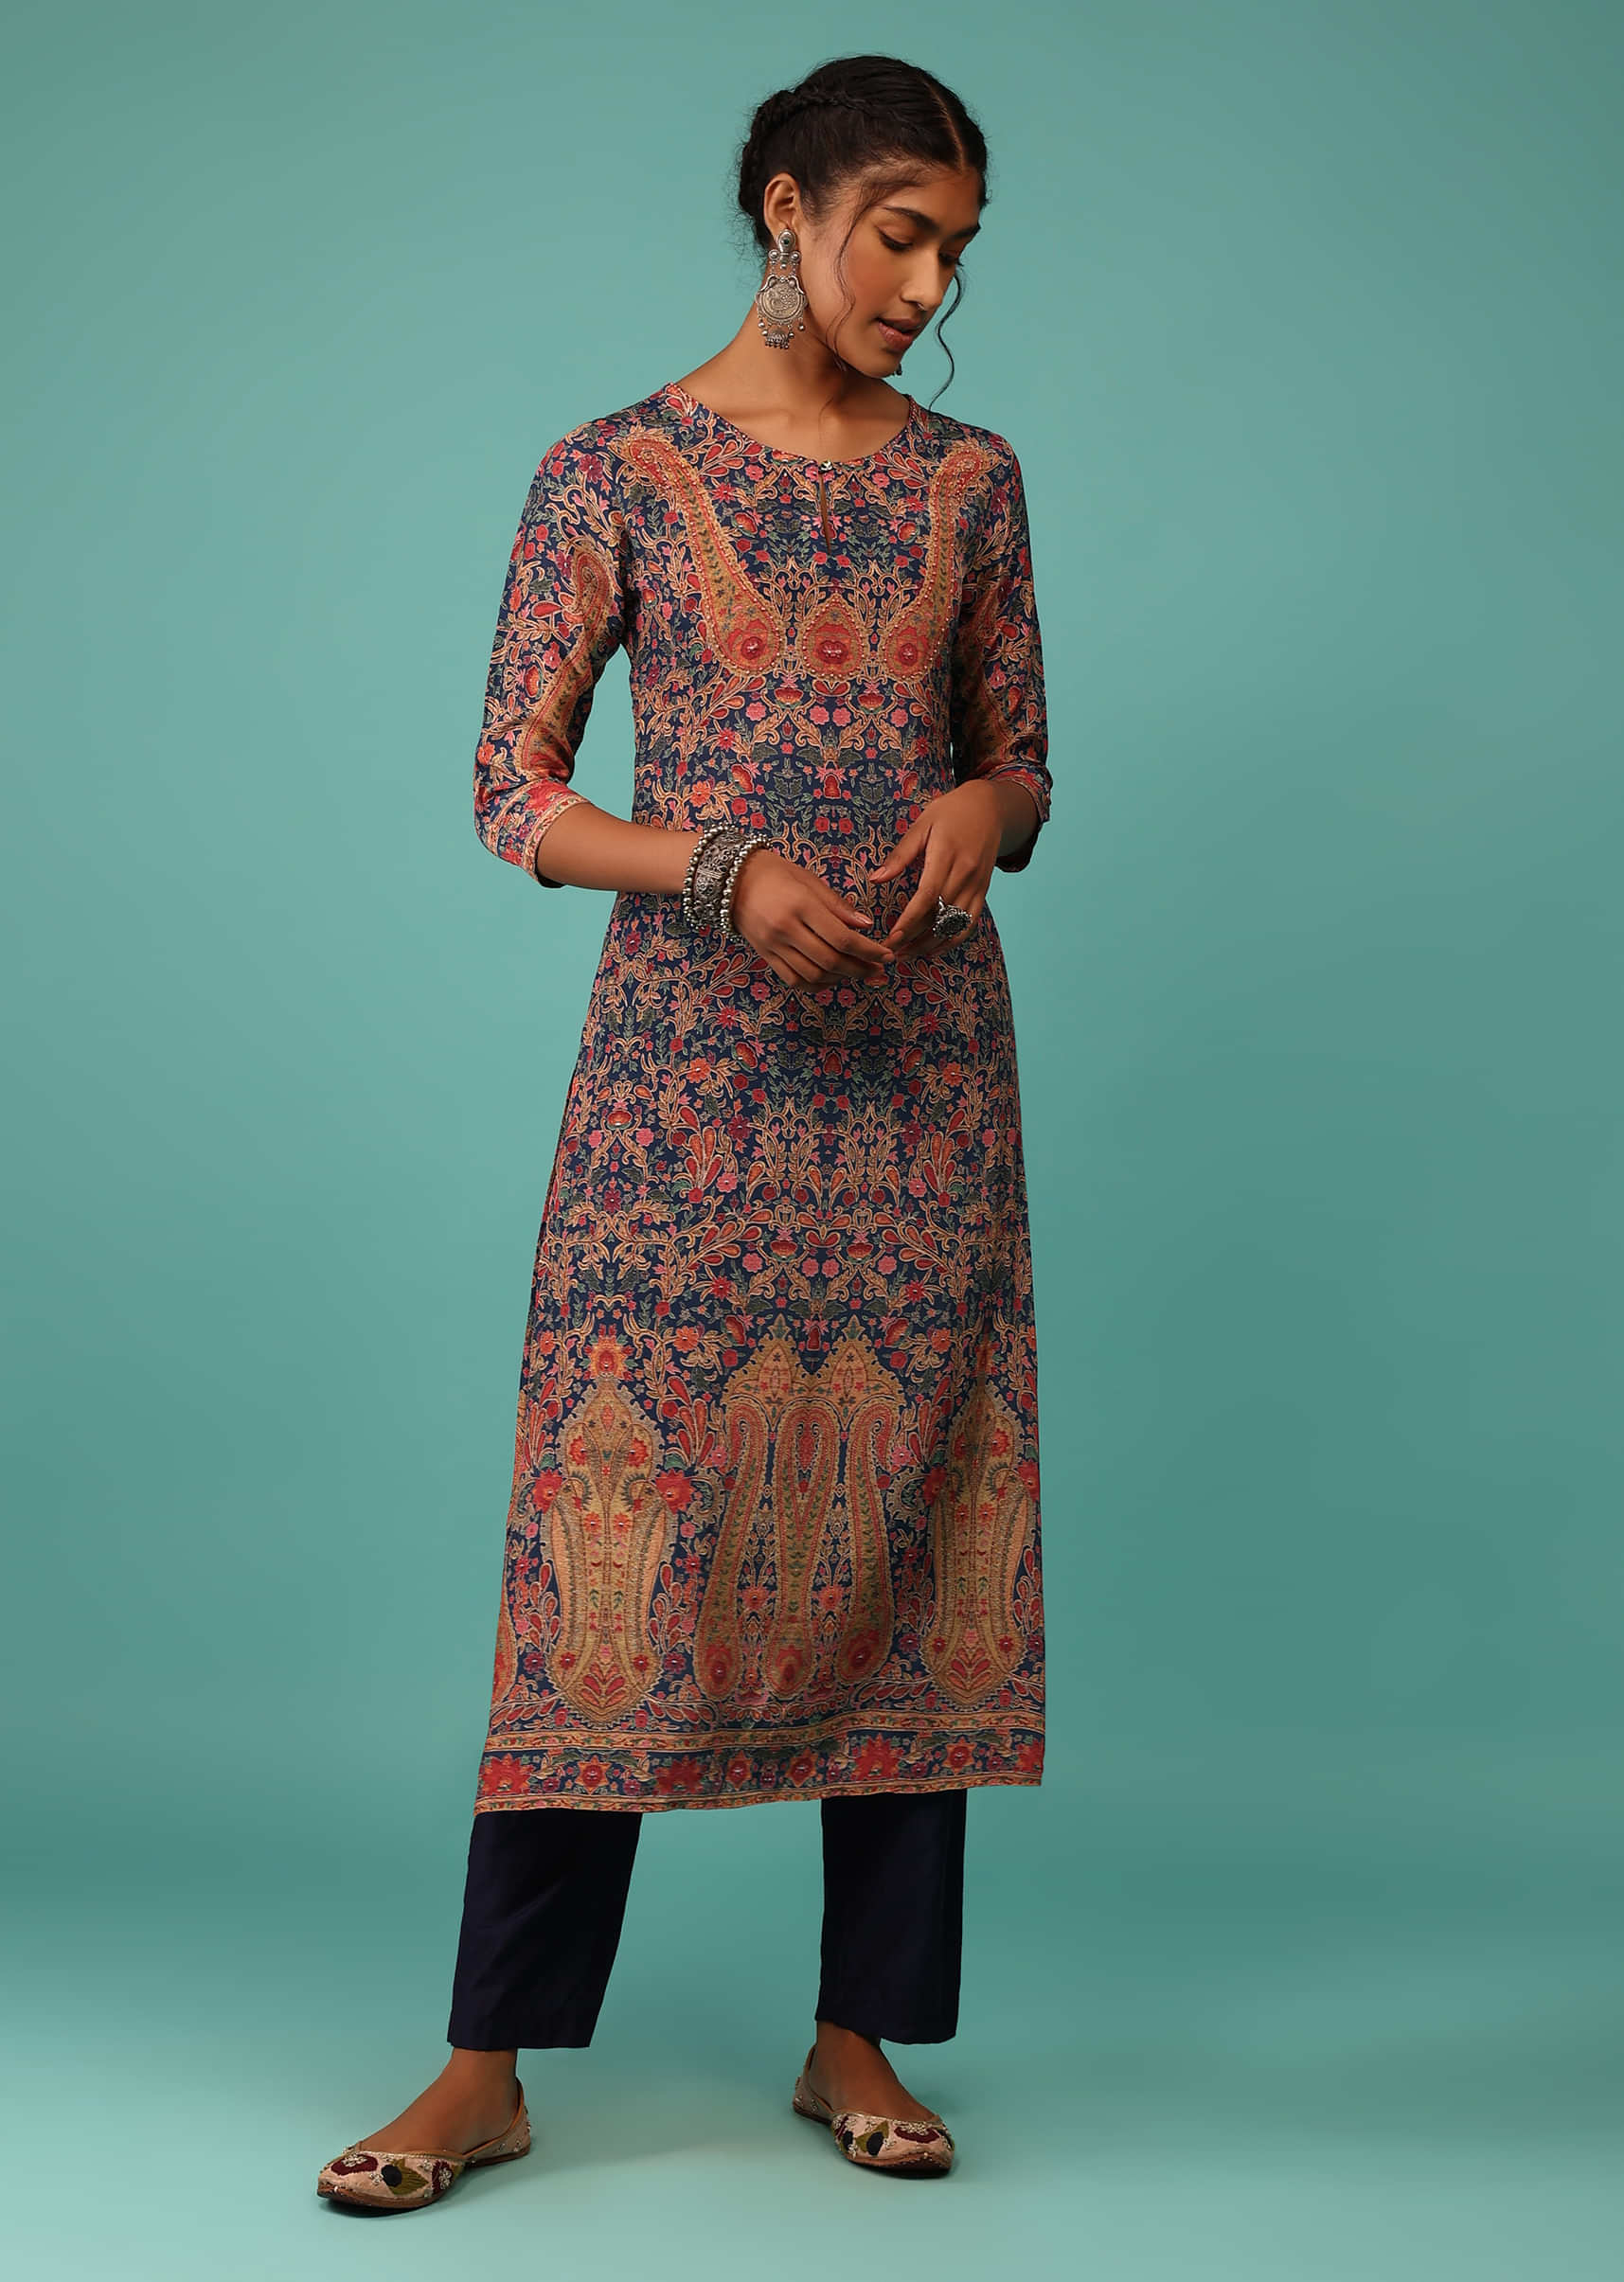 Teal Blue Kurta In Crepe With Kashmiri Floral Print And Embroidery